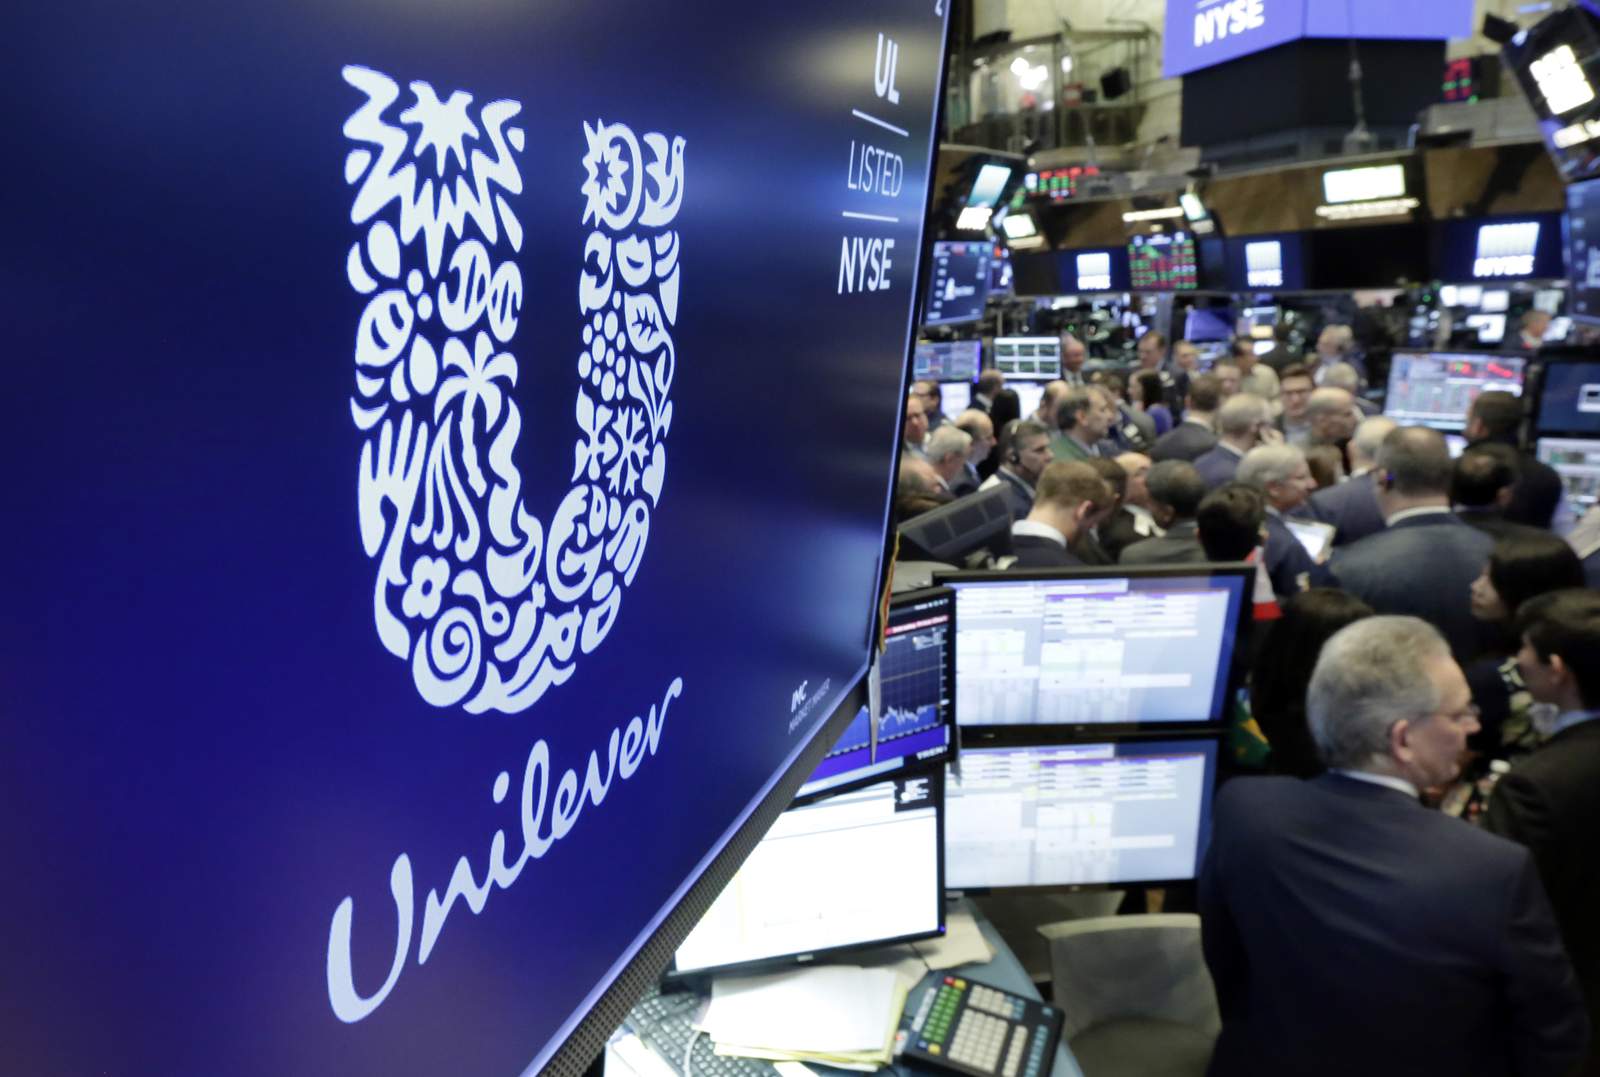 Amid pandemic, consumer goods sales hold up at Unilever